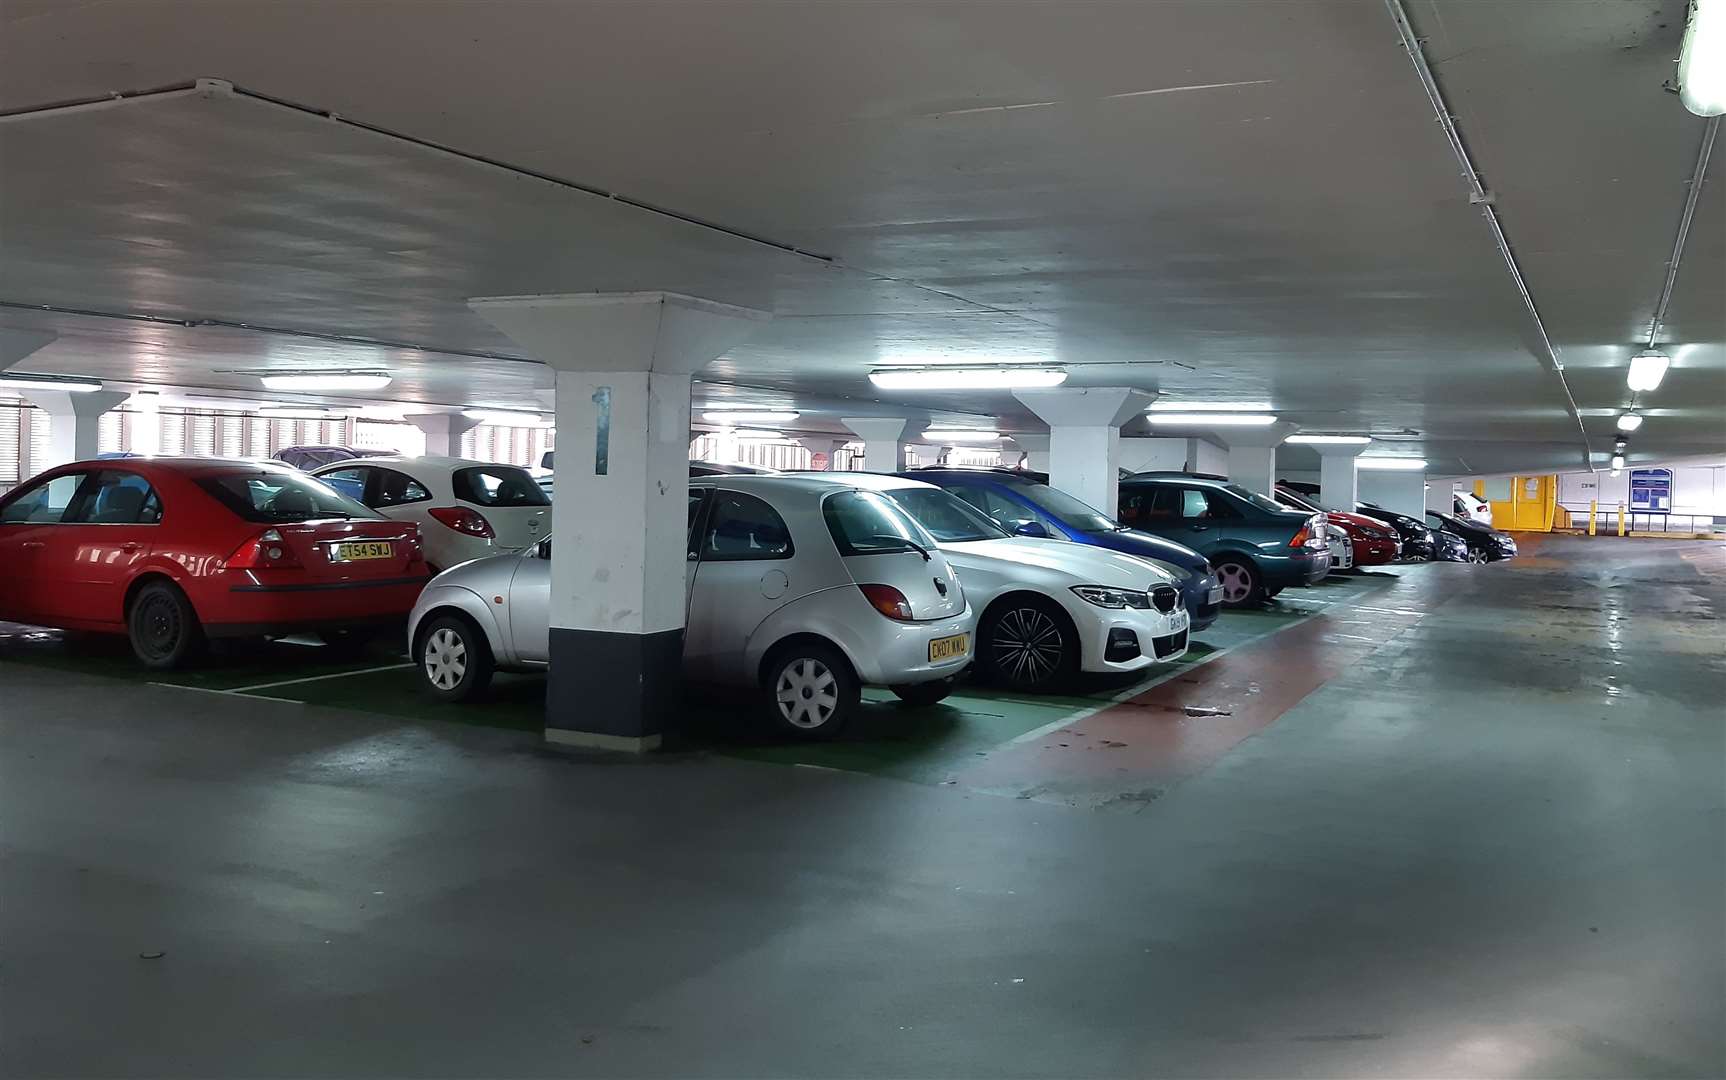 The facility features 289 car park spaces including 24 disabled bays